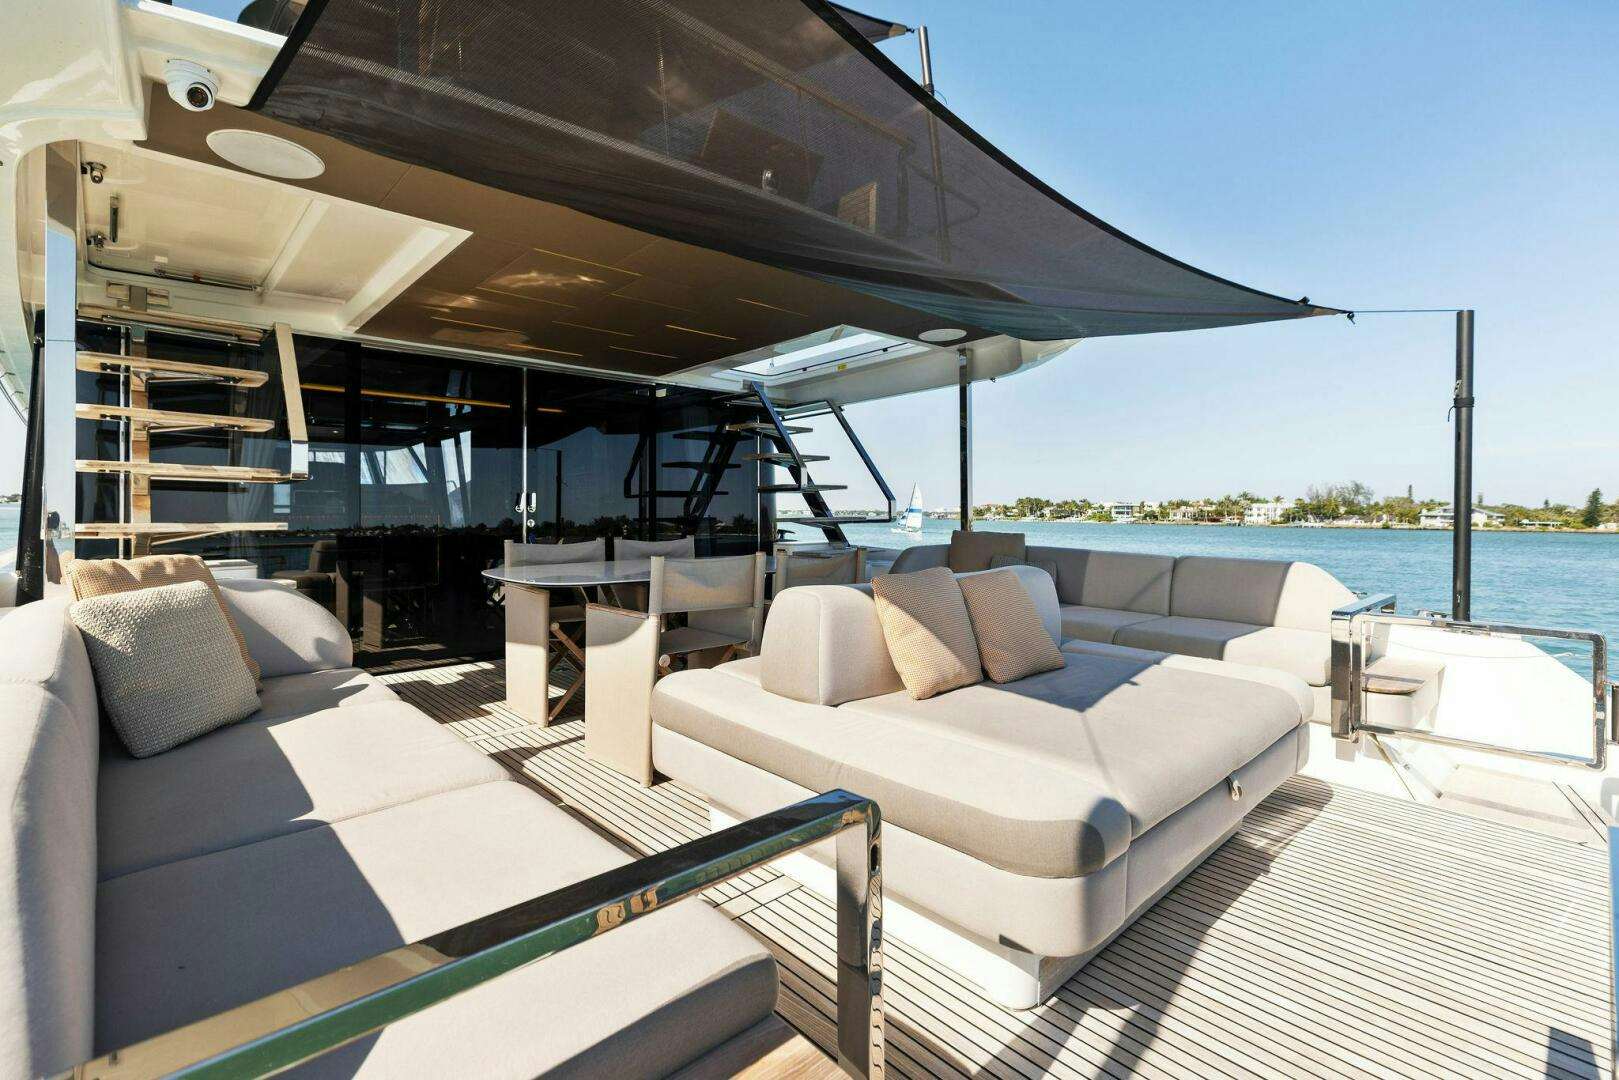 Infinity
Yacht for Sale